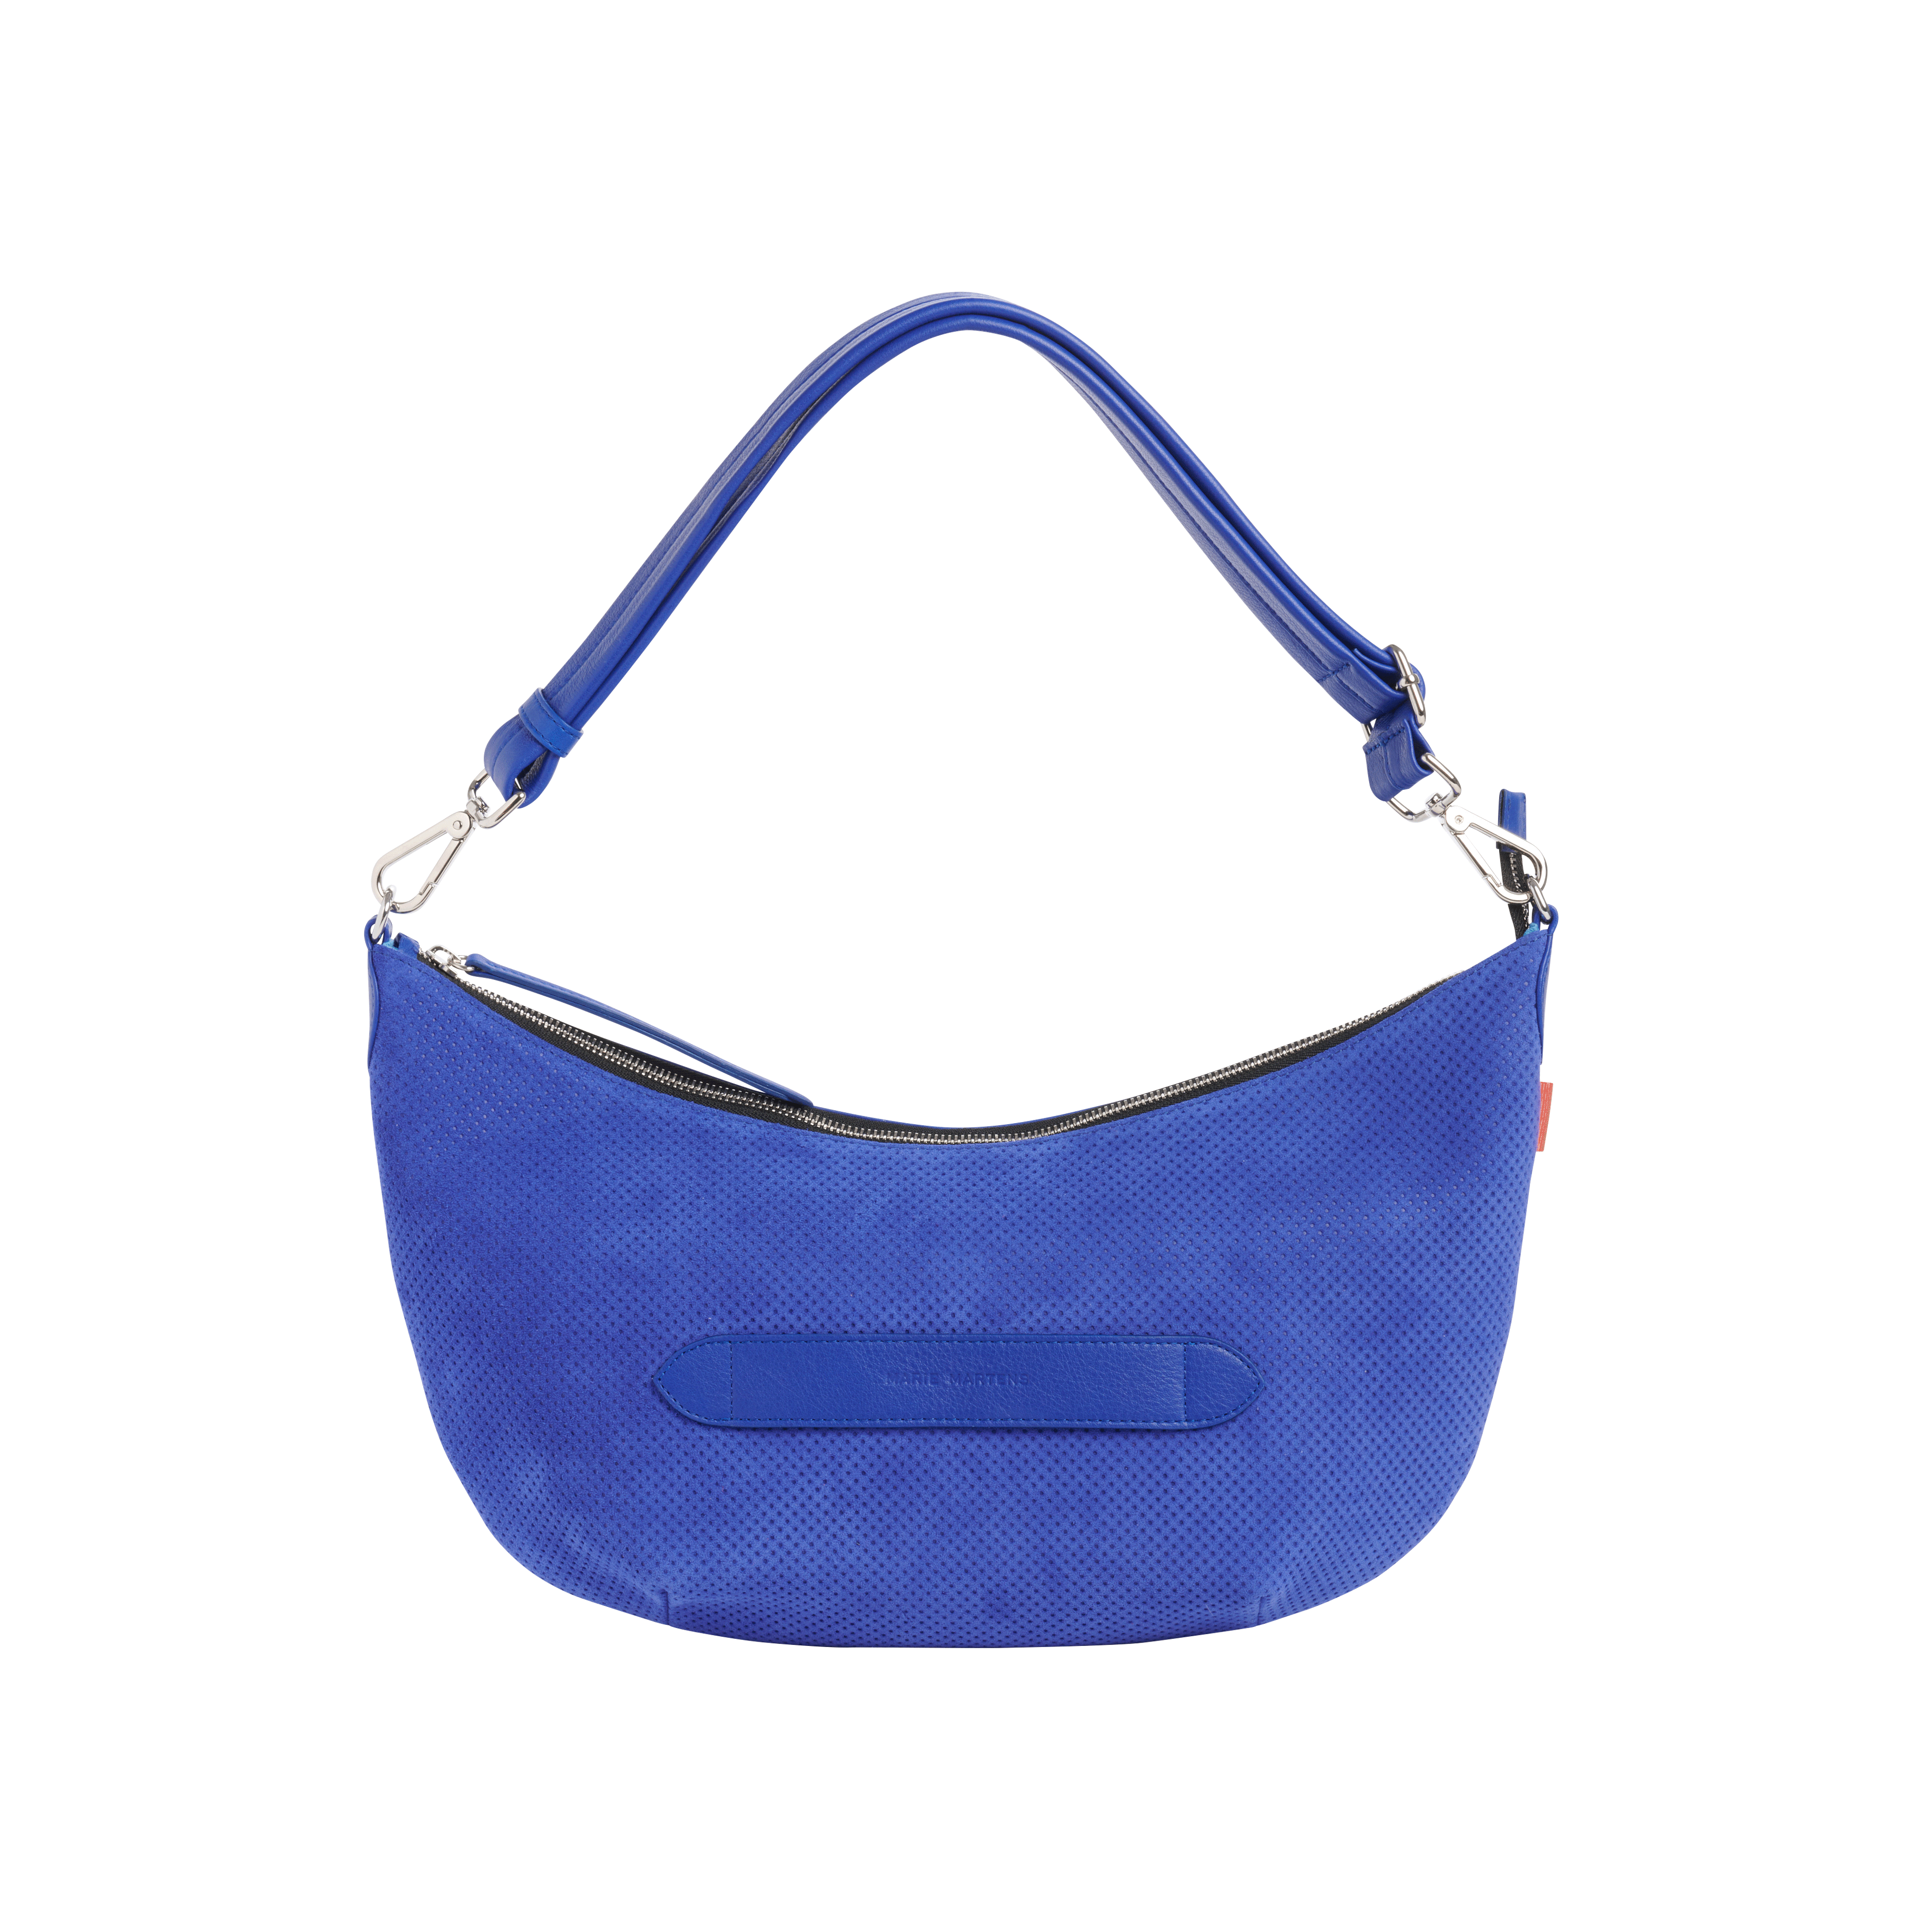 Marie Martens Smile Perforated Suede Electric Blue